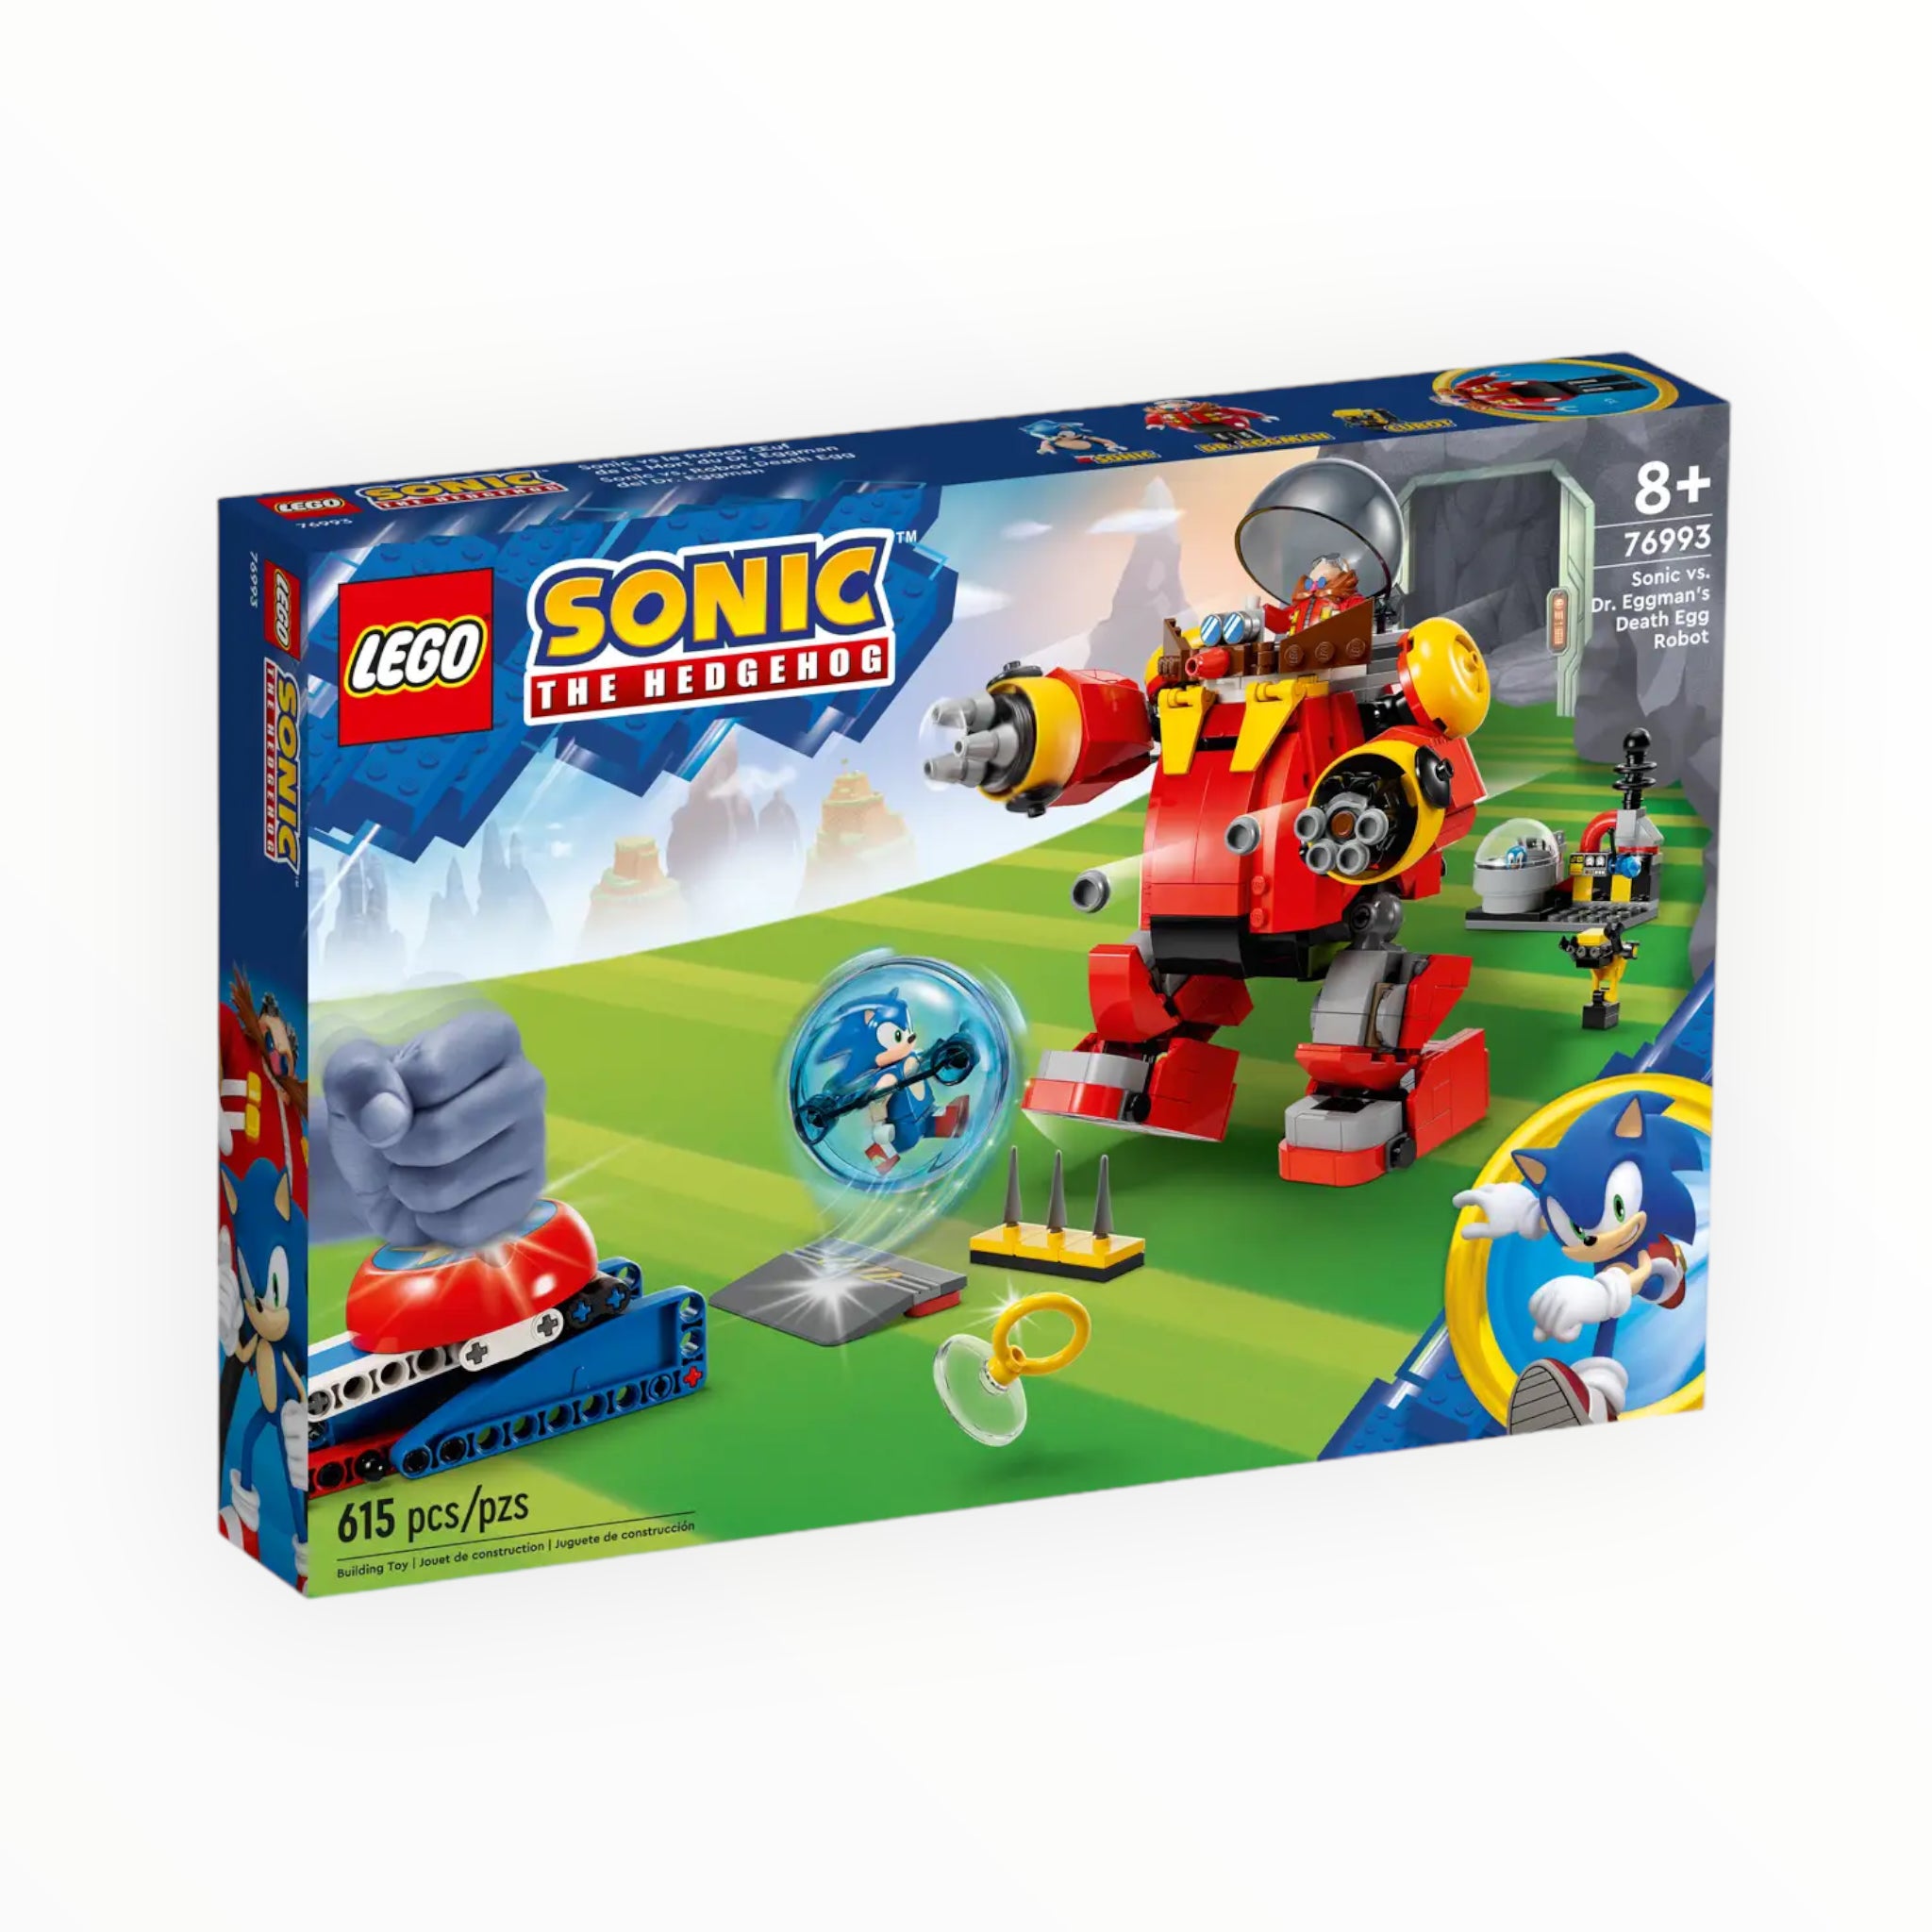 LEGO Sonic the Hedgehog Sonic vs. Dr. Eggman’s Death Egg Robot 76993  Building Toy for Sonic Fans and 8 Year Old Gamers, Includes Speed Sphere  and